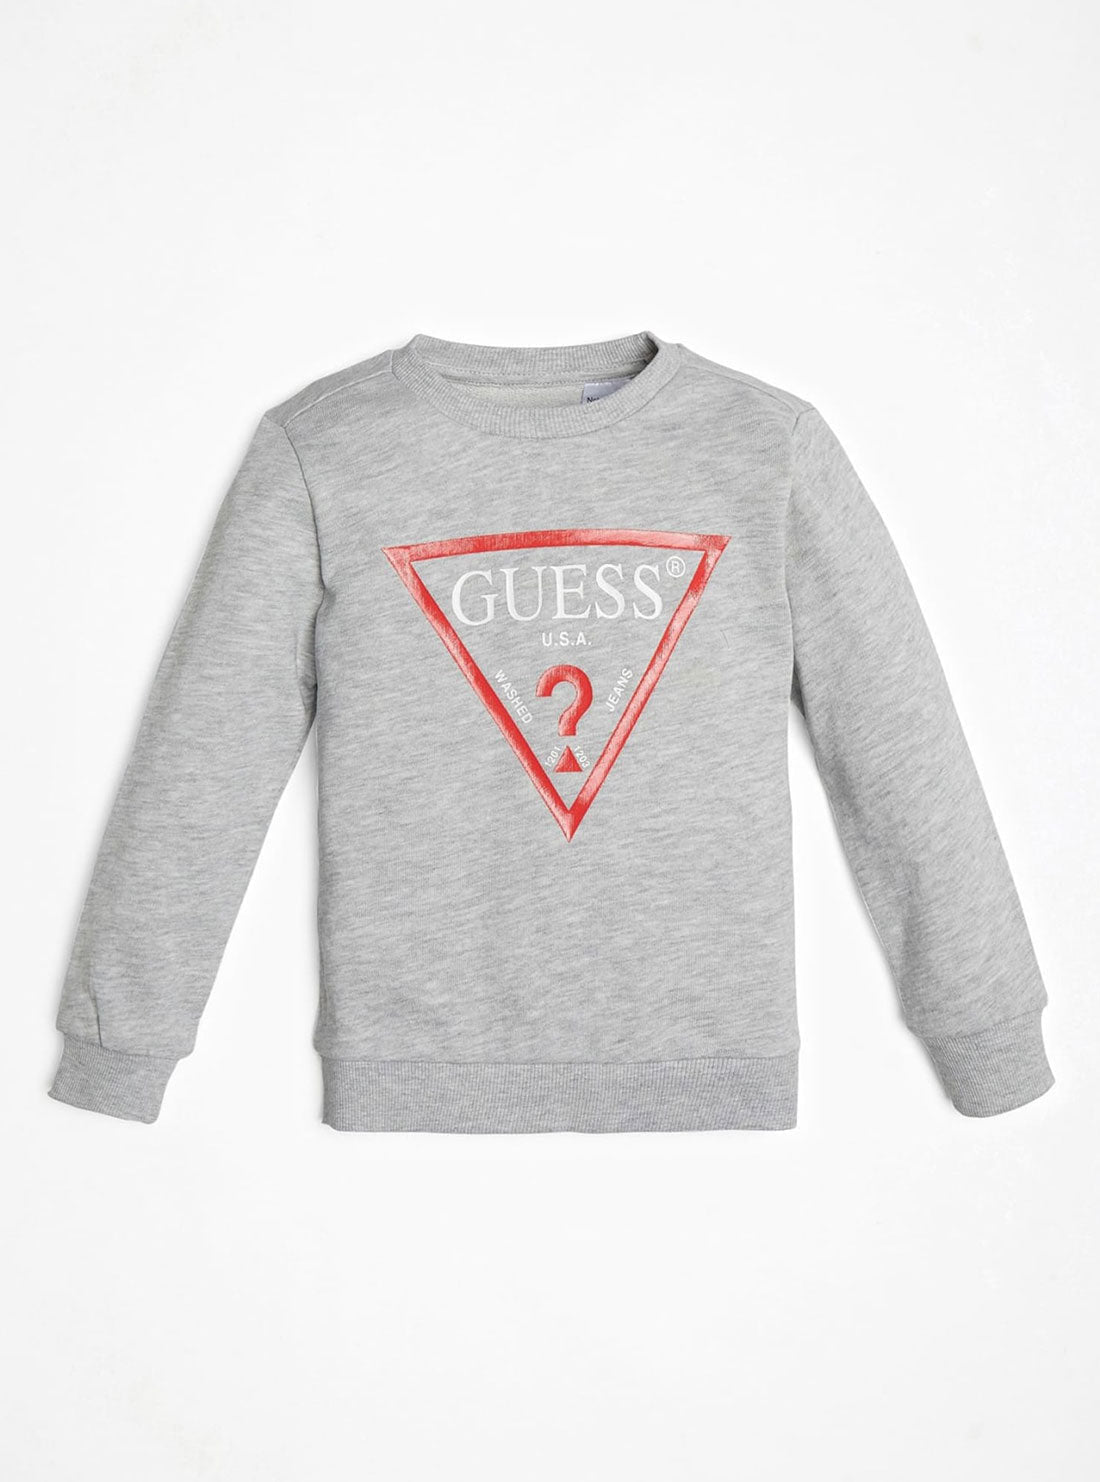 GUESS Long Sleeve Fleece Pullover Boys Grey Top front view